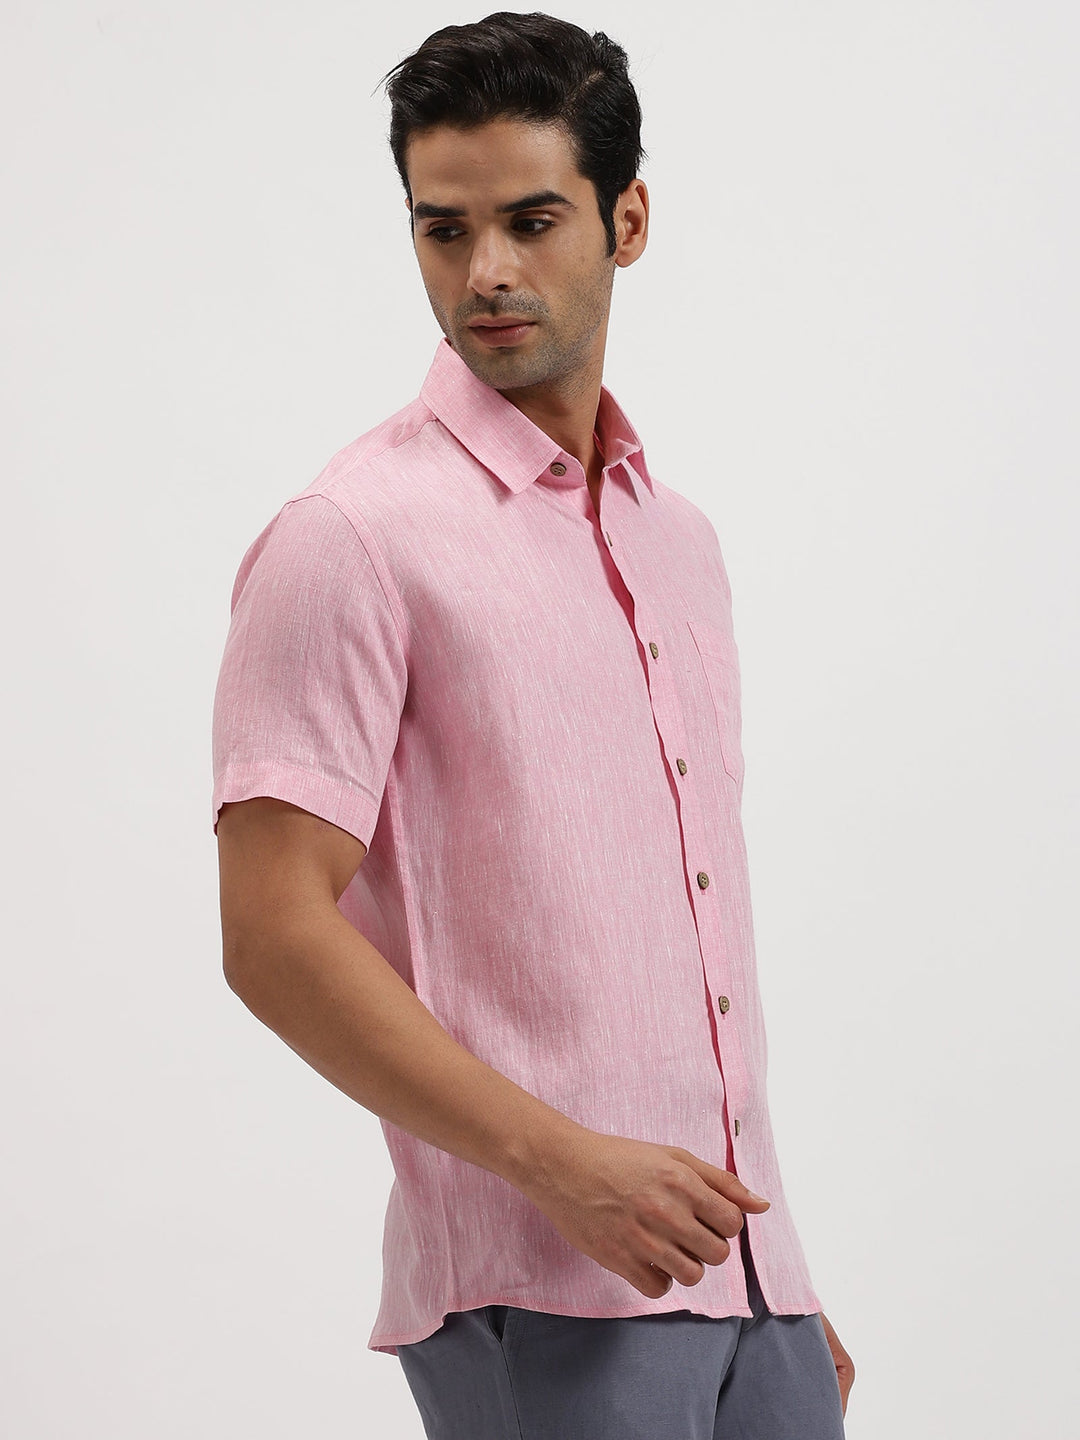 Bryce - Pure Linen Chambray Half Sleeve Shirt - Pink | Relove